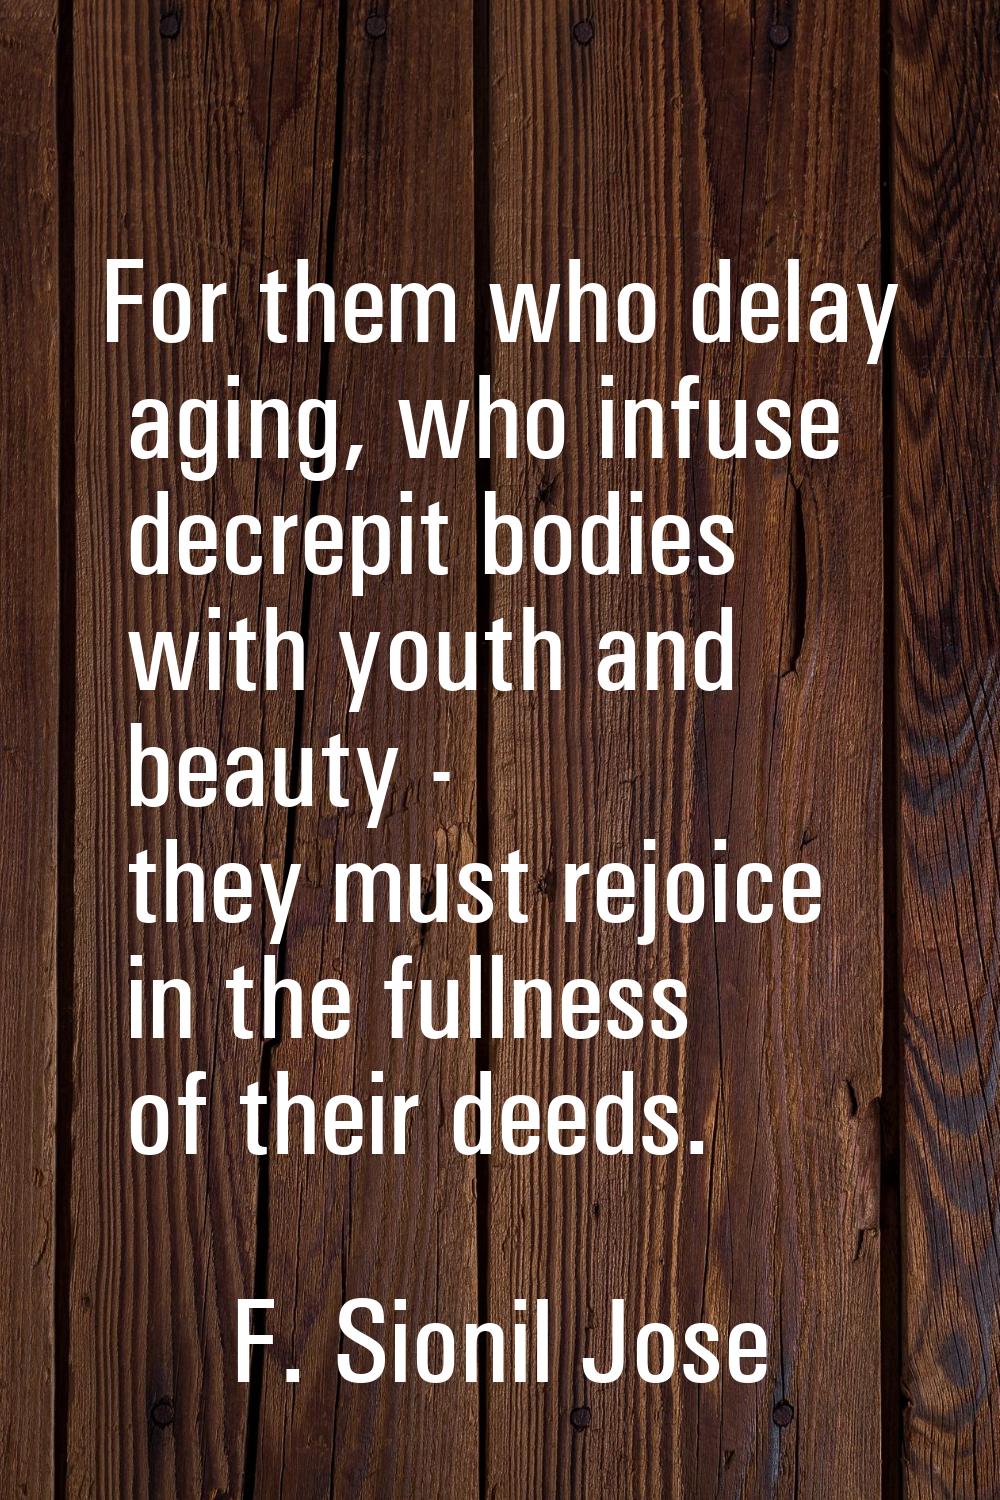 For them who delay aging, who infuse decrepit bodies with youth and beauty - they must rejoice in t